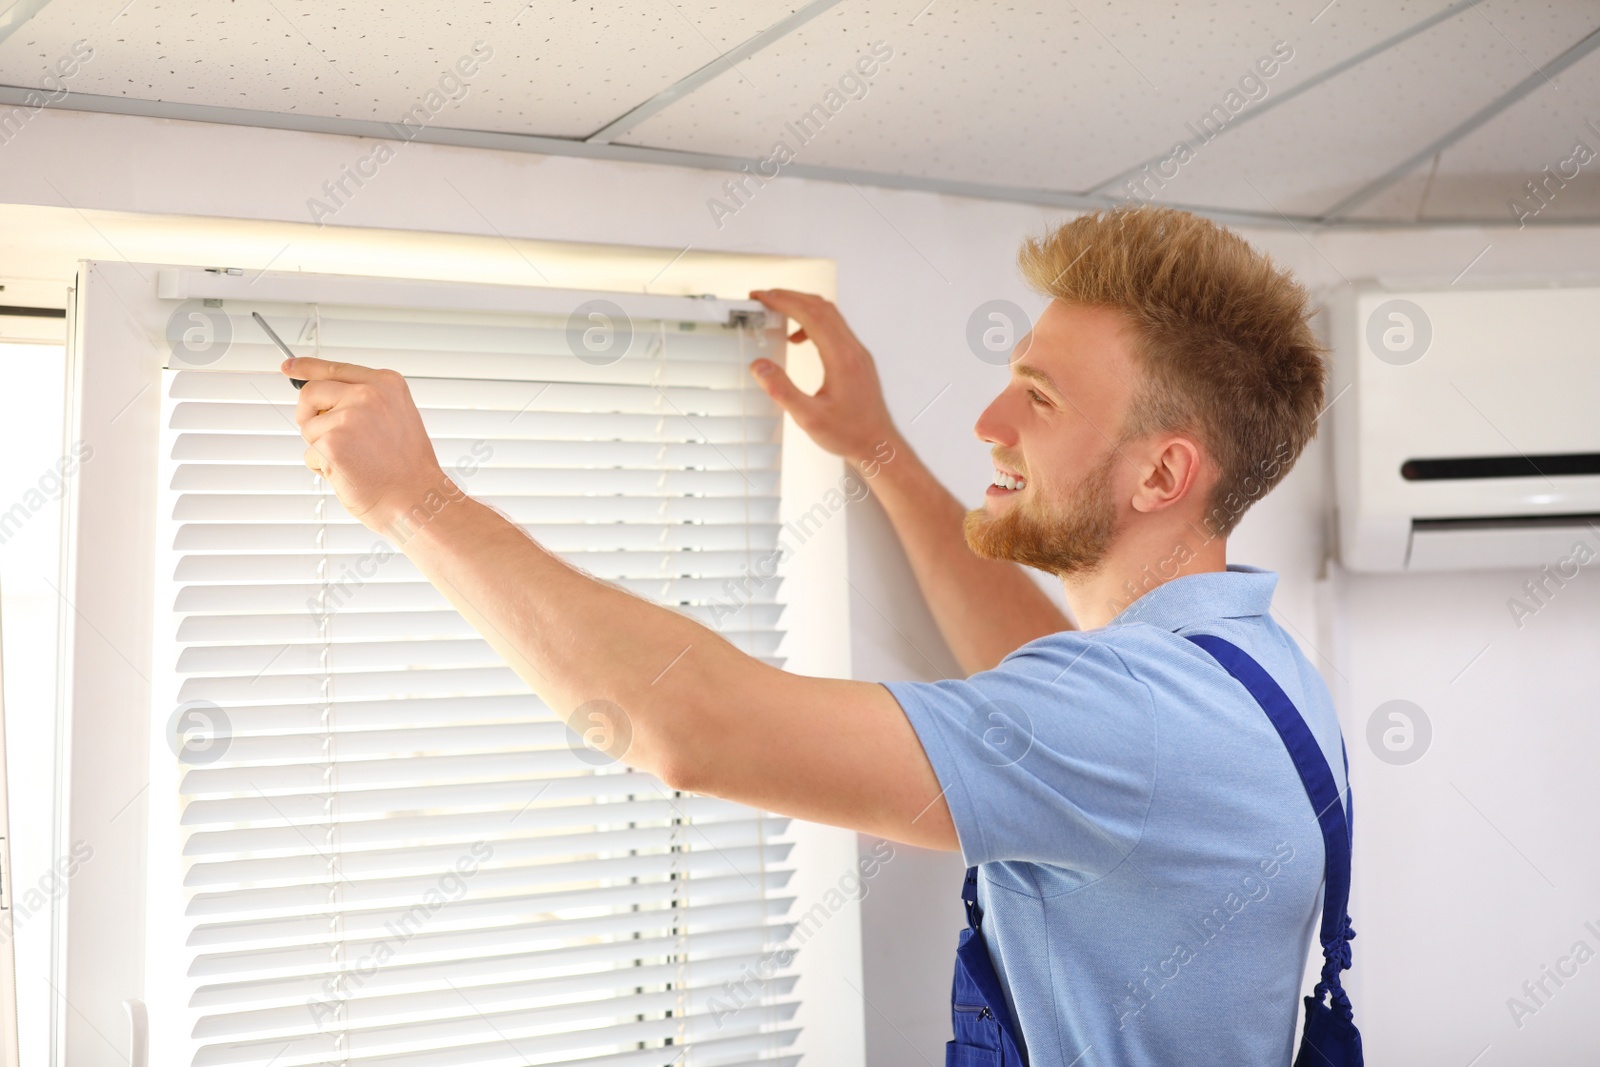 Image of Handyman with screwdriver installing window blinds indoors